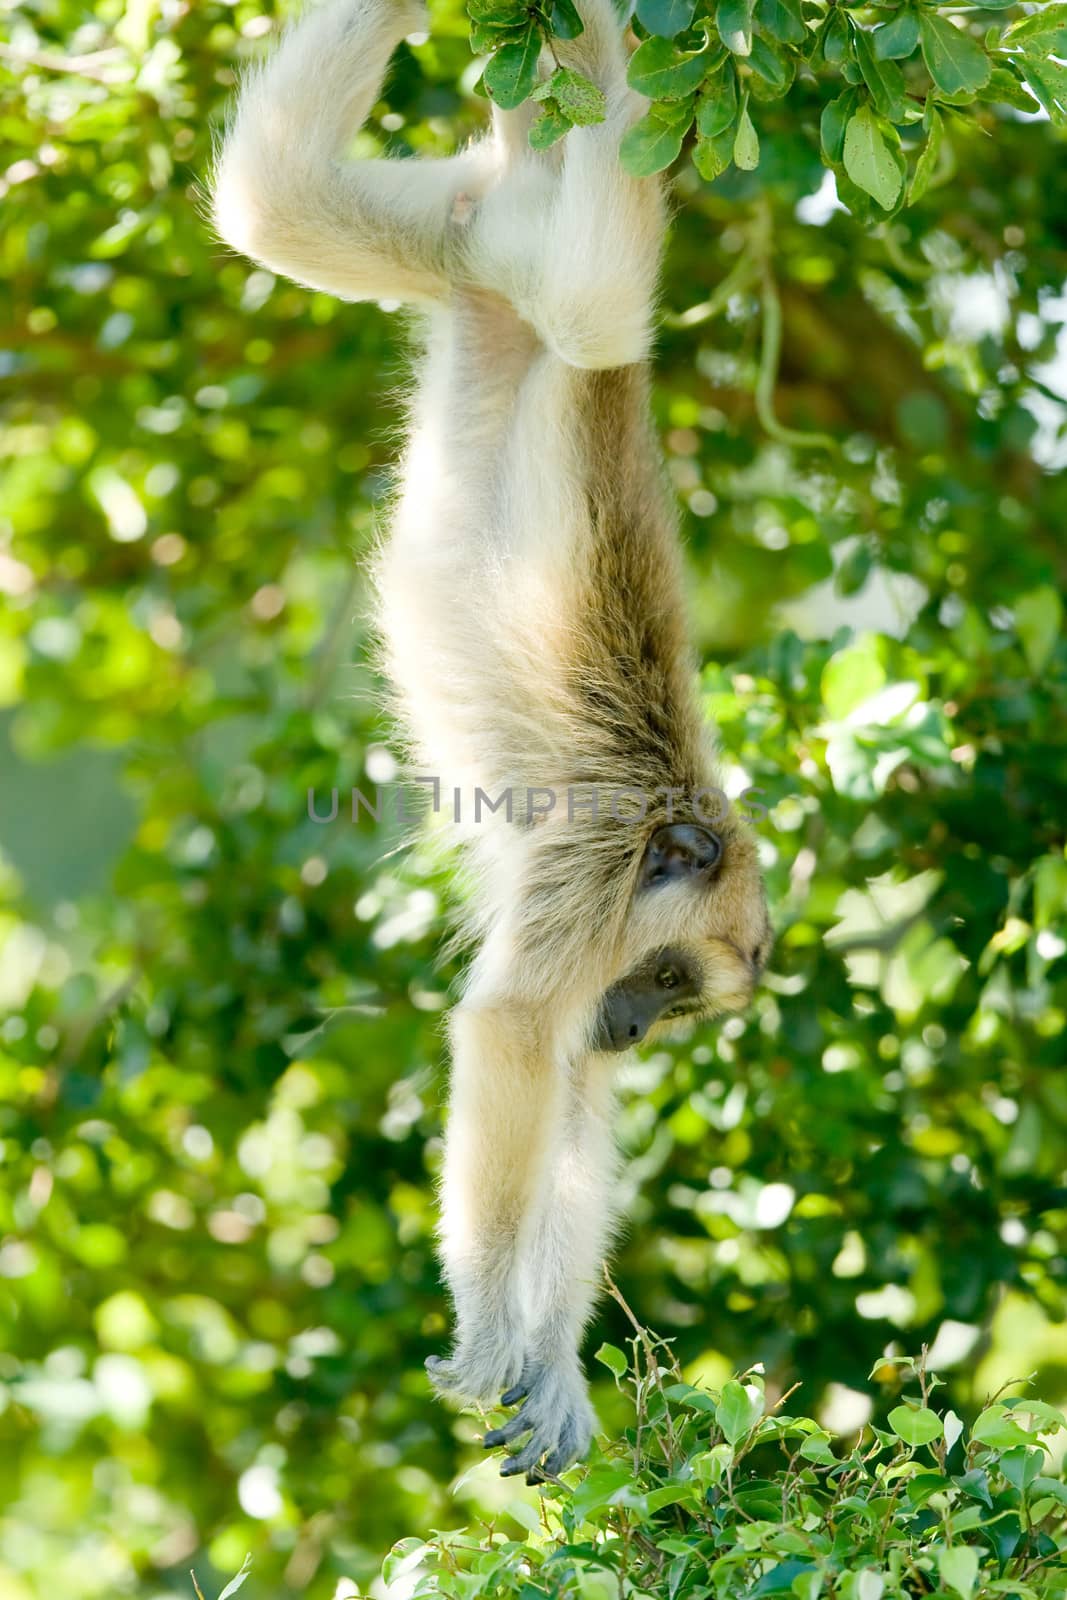 Lar Gibbon (Hylobates lar) hanging down from a tree in a zoo